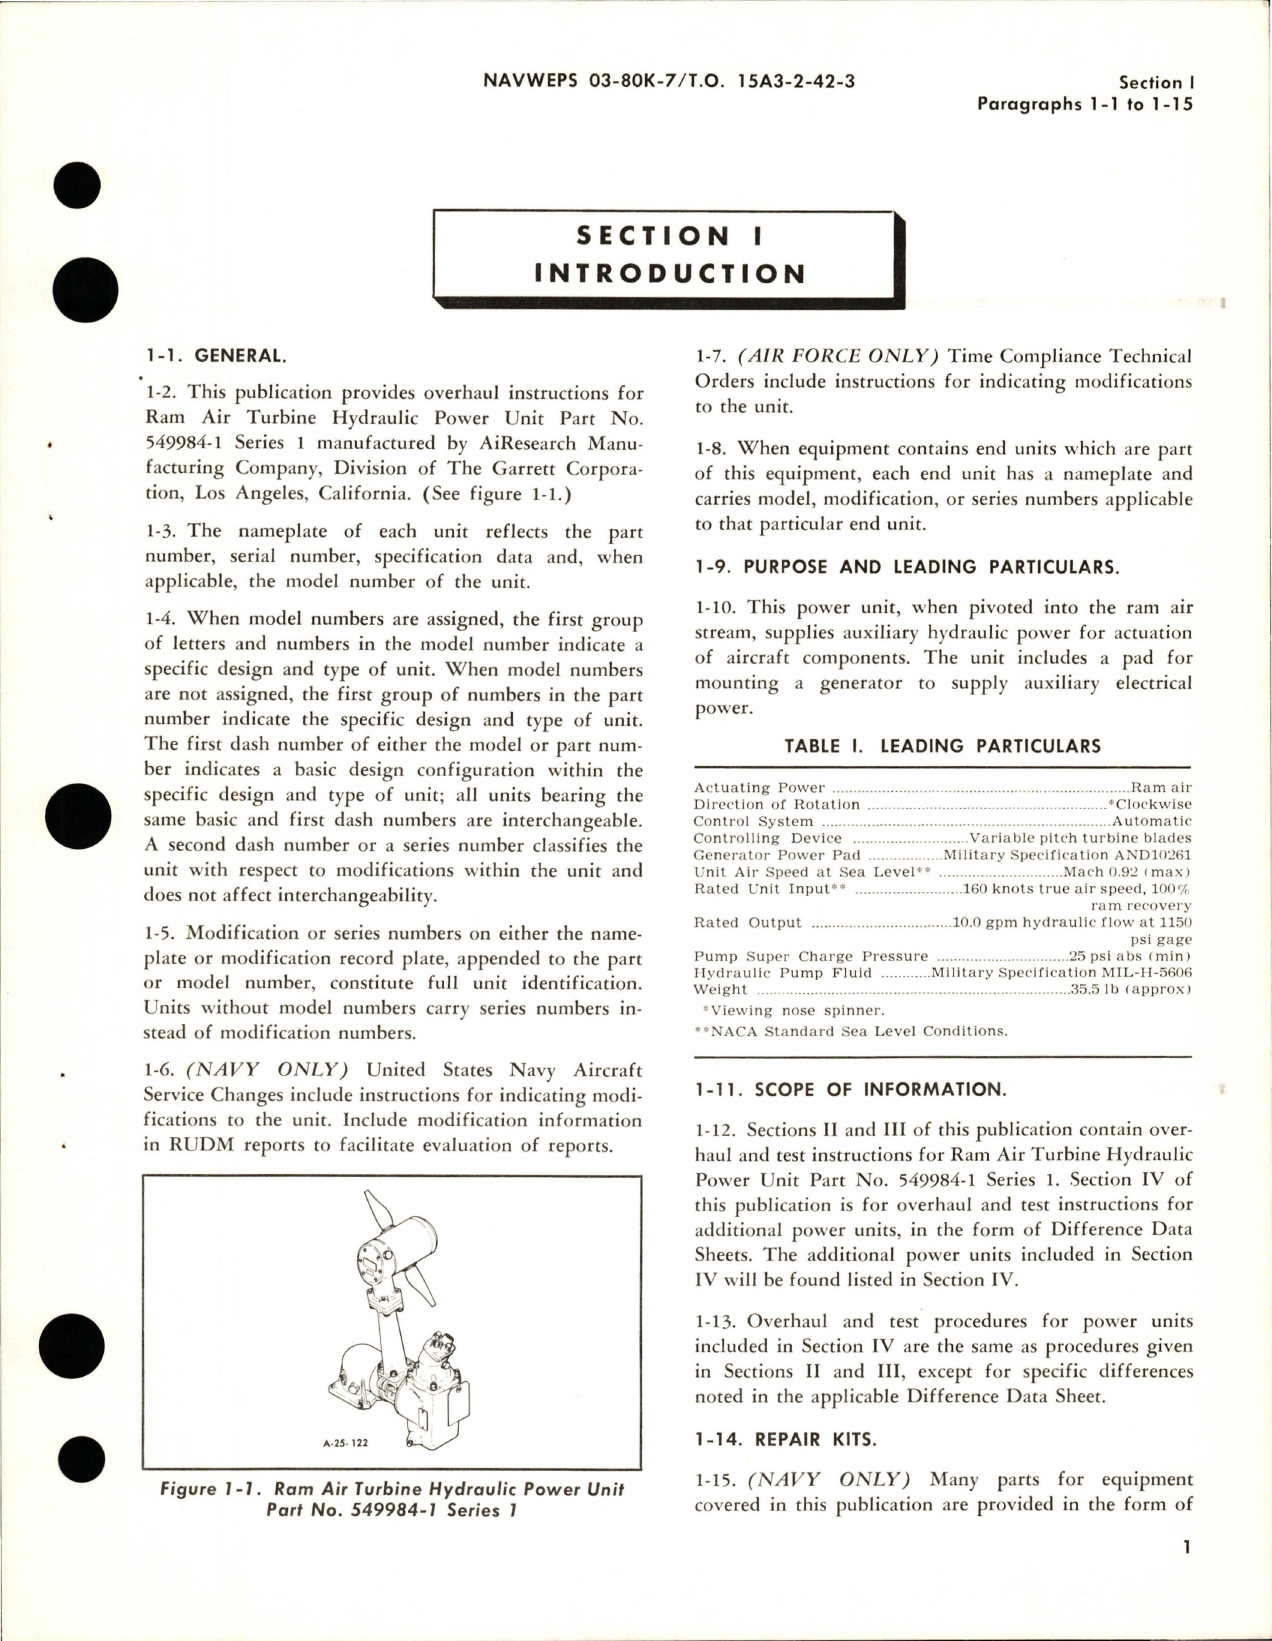 Sample page 5 from AirCorps Library document: Overhaul Instructions for Ram Air Turbine Hydraulic Power Unit - Part 549984-1